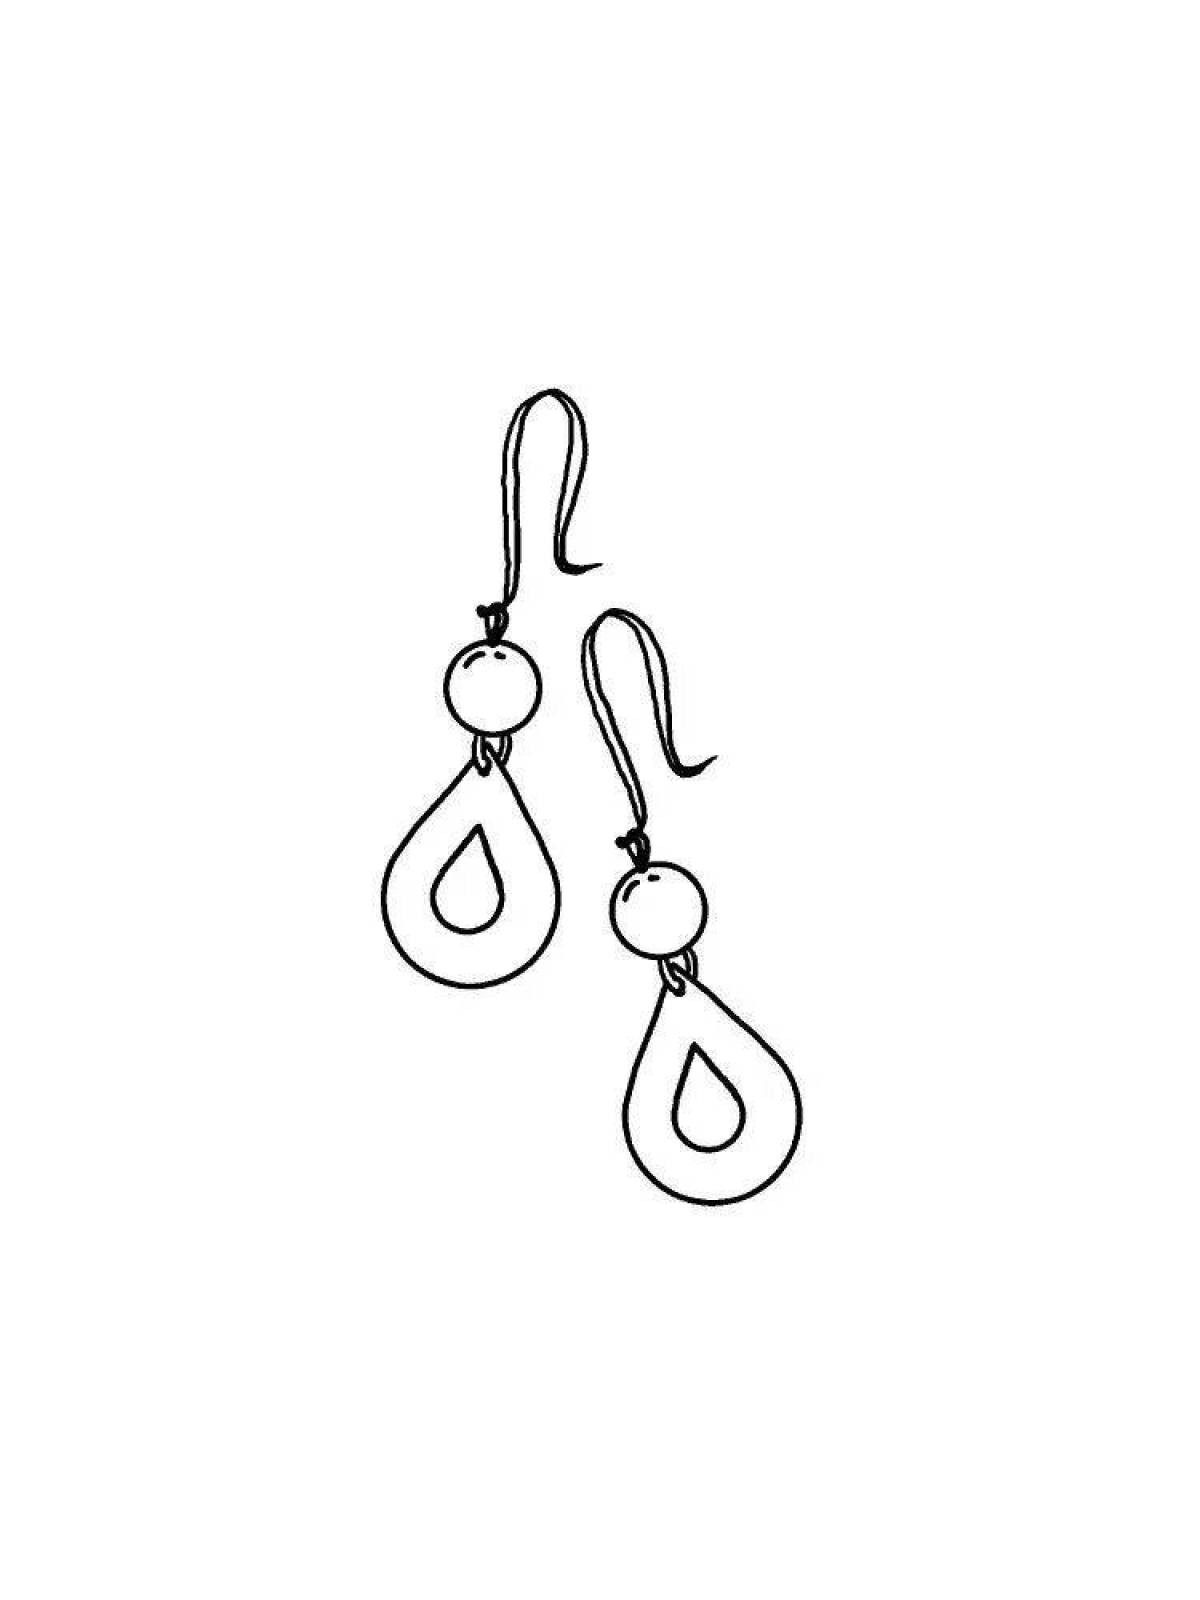 Coloring page glamor earrings